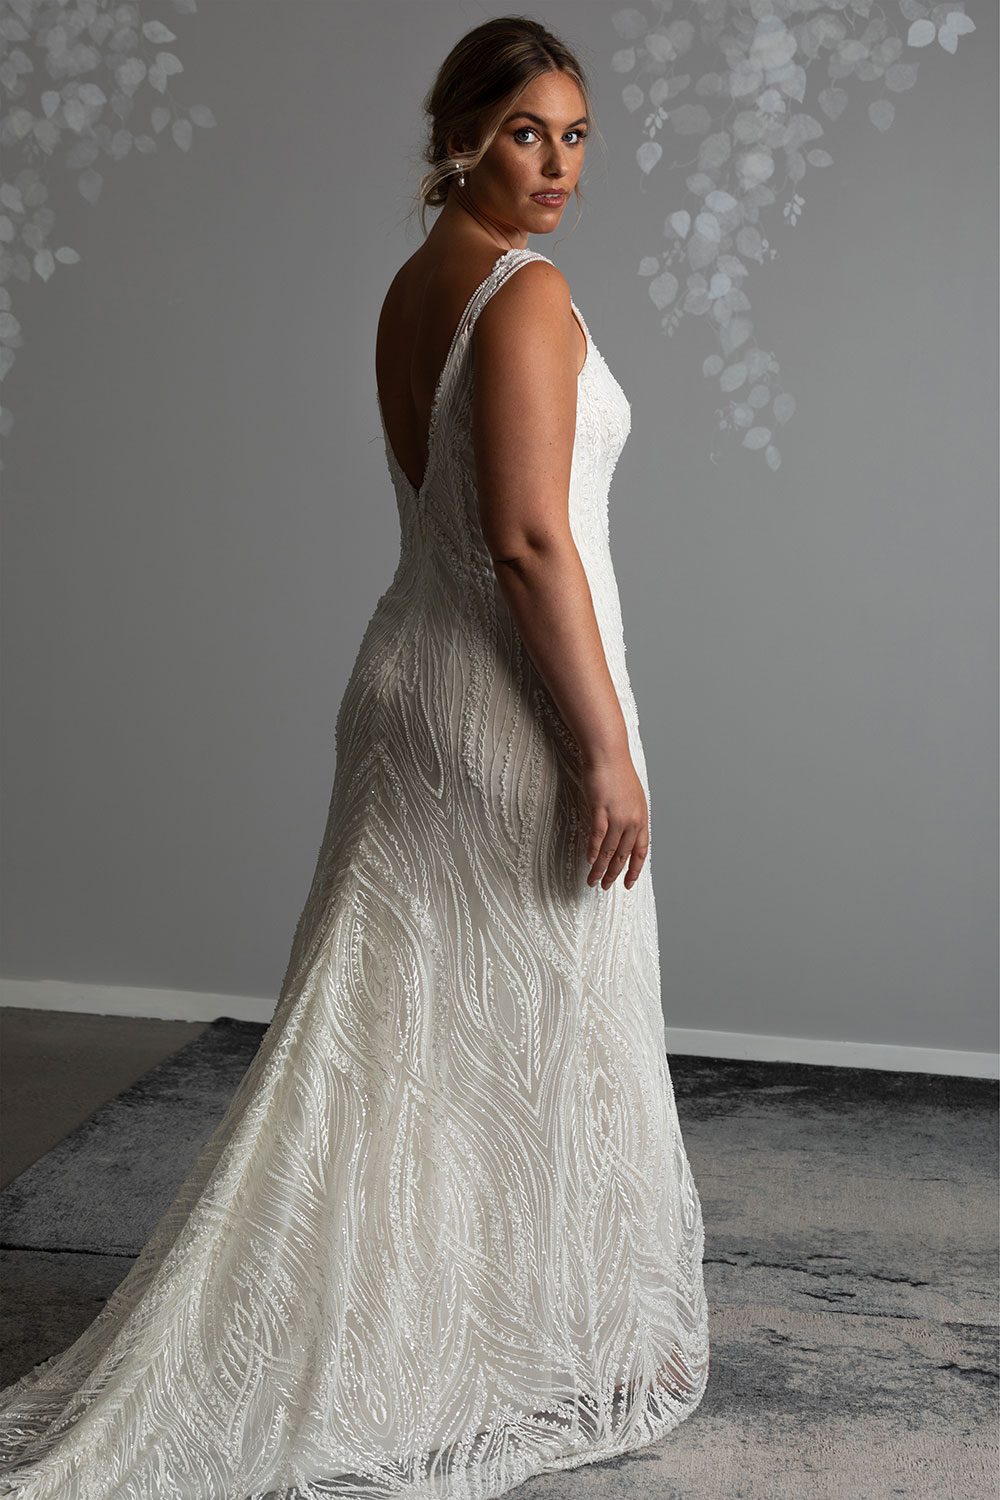 Kiera Wedding Dress from Vinka Design. Beautifully beaded lace wedding dress. Deep V-neckline both front and back is complemented with delicate sheer lace shoulder detail & structured bodice. Model showing back of dress with beautiful beaded lace